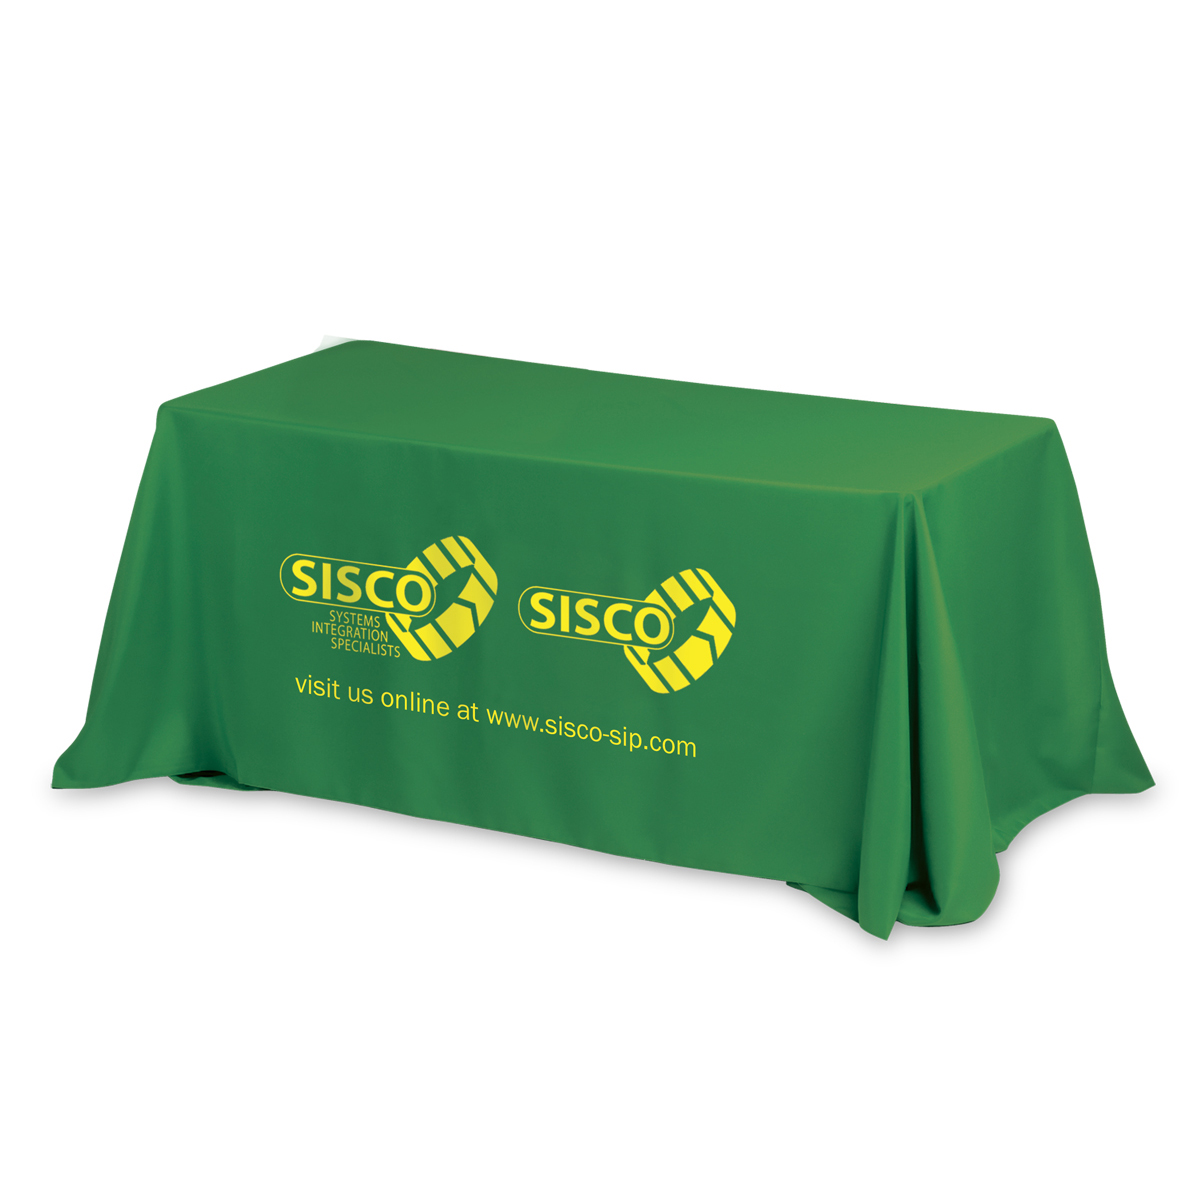 "ZENYATTA EIGHT" 4-Sided Throw Style Table Covers & Table Throws (Spot Color Print) / Fits 8 ft Table